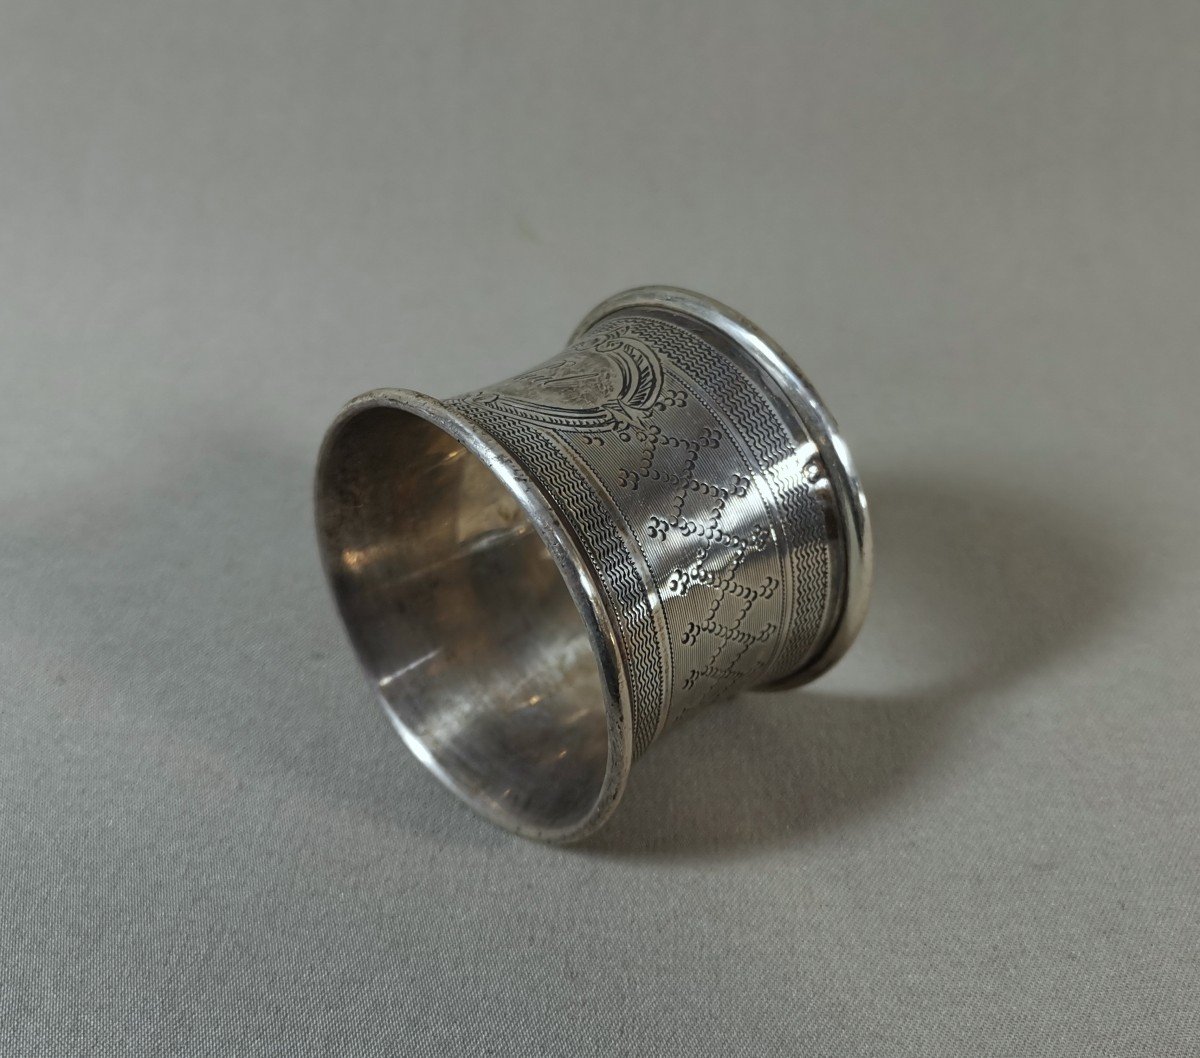 Flowing Or Napkin Ring From The 19th Century In Silver Minerva, Goldsmith César Tonnelier (1845-1882)-photo-3